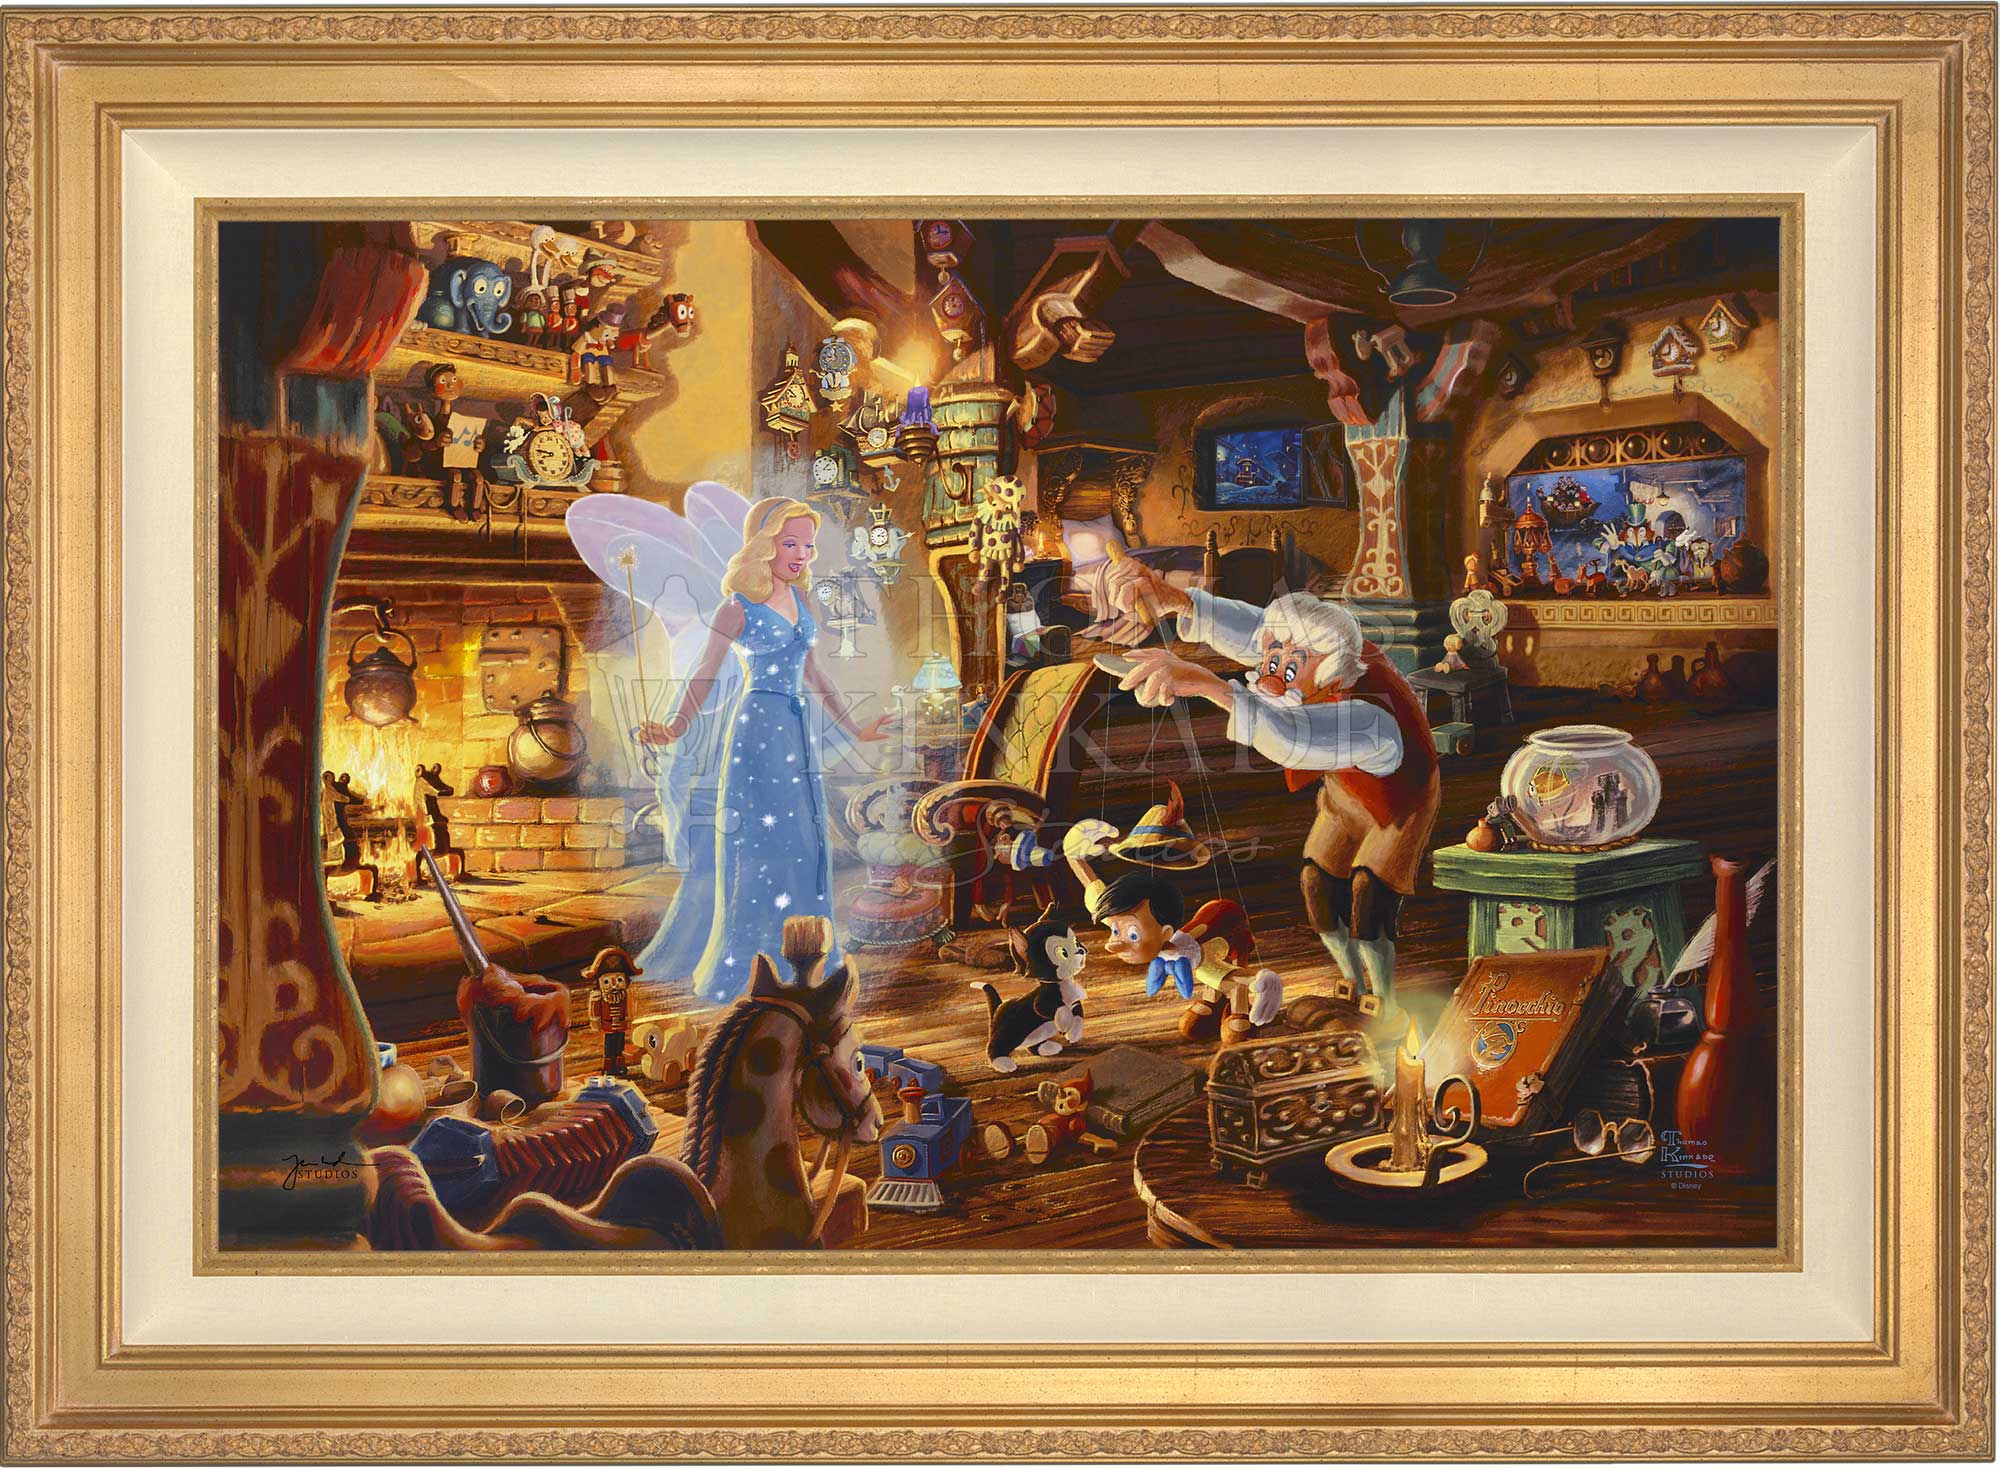 The Blue Fairy is poised to make this wish come true. Joy fills the workshop as Geppetto’s wish is granted.  The faces of Jiminy Cricket and Cleo as they watch the sweet interaction of Figaro meeting Pinocchio for the very first time. Antique Gold Frame